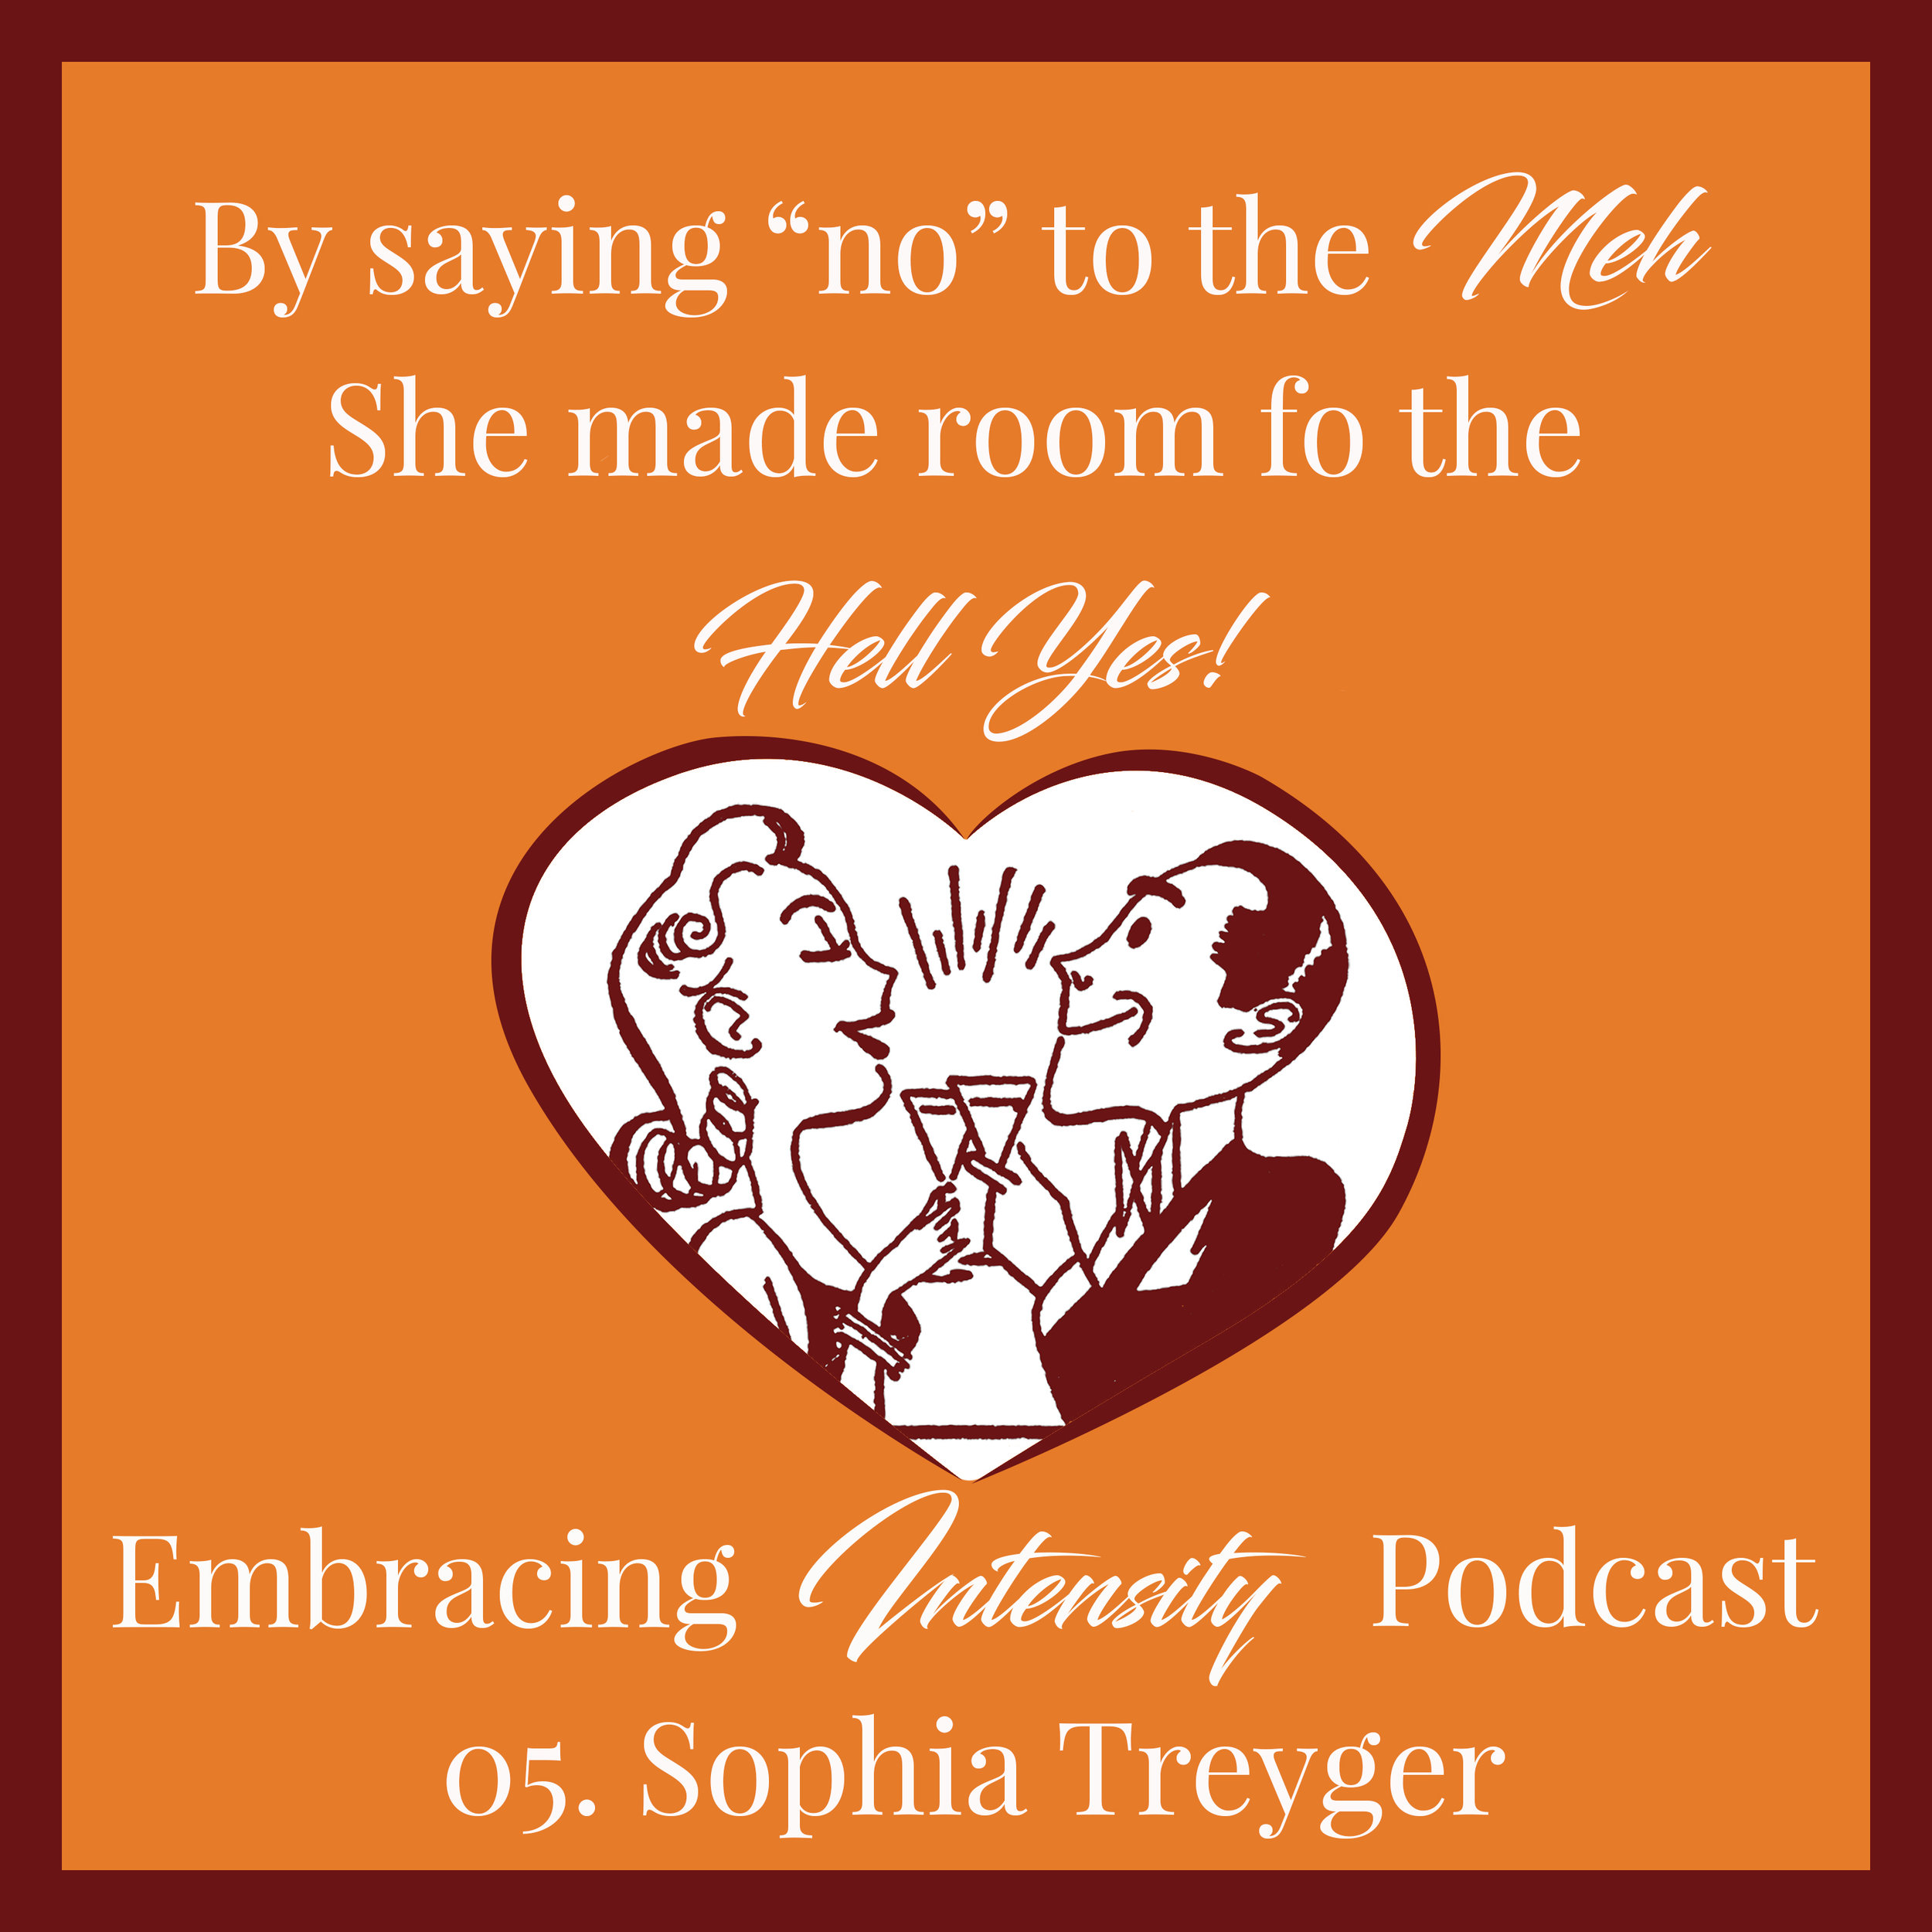 By saying "no" to the Meh, she made room for the hell yes! ~ Embracing Intensity Podcast ep. 05: The Intersection of Intensity and Intimacy with Sophia Treyger